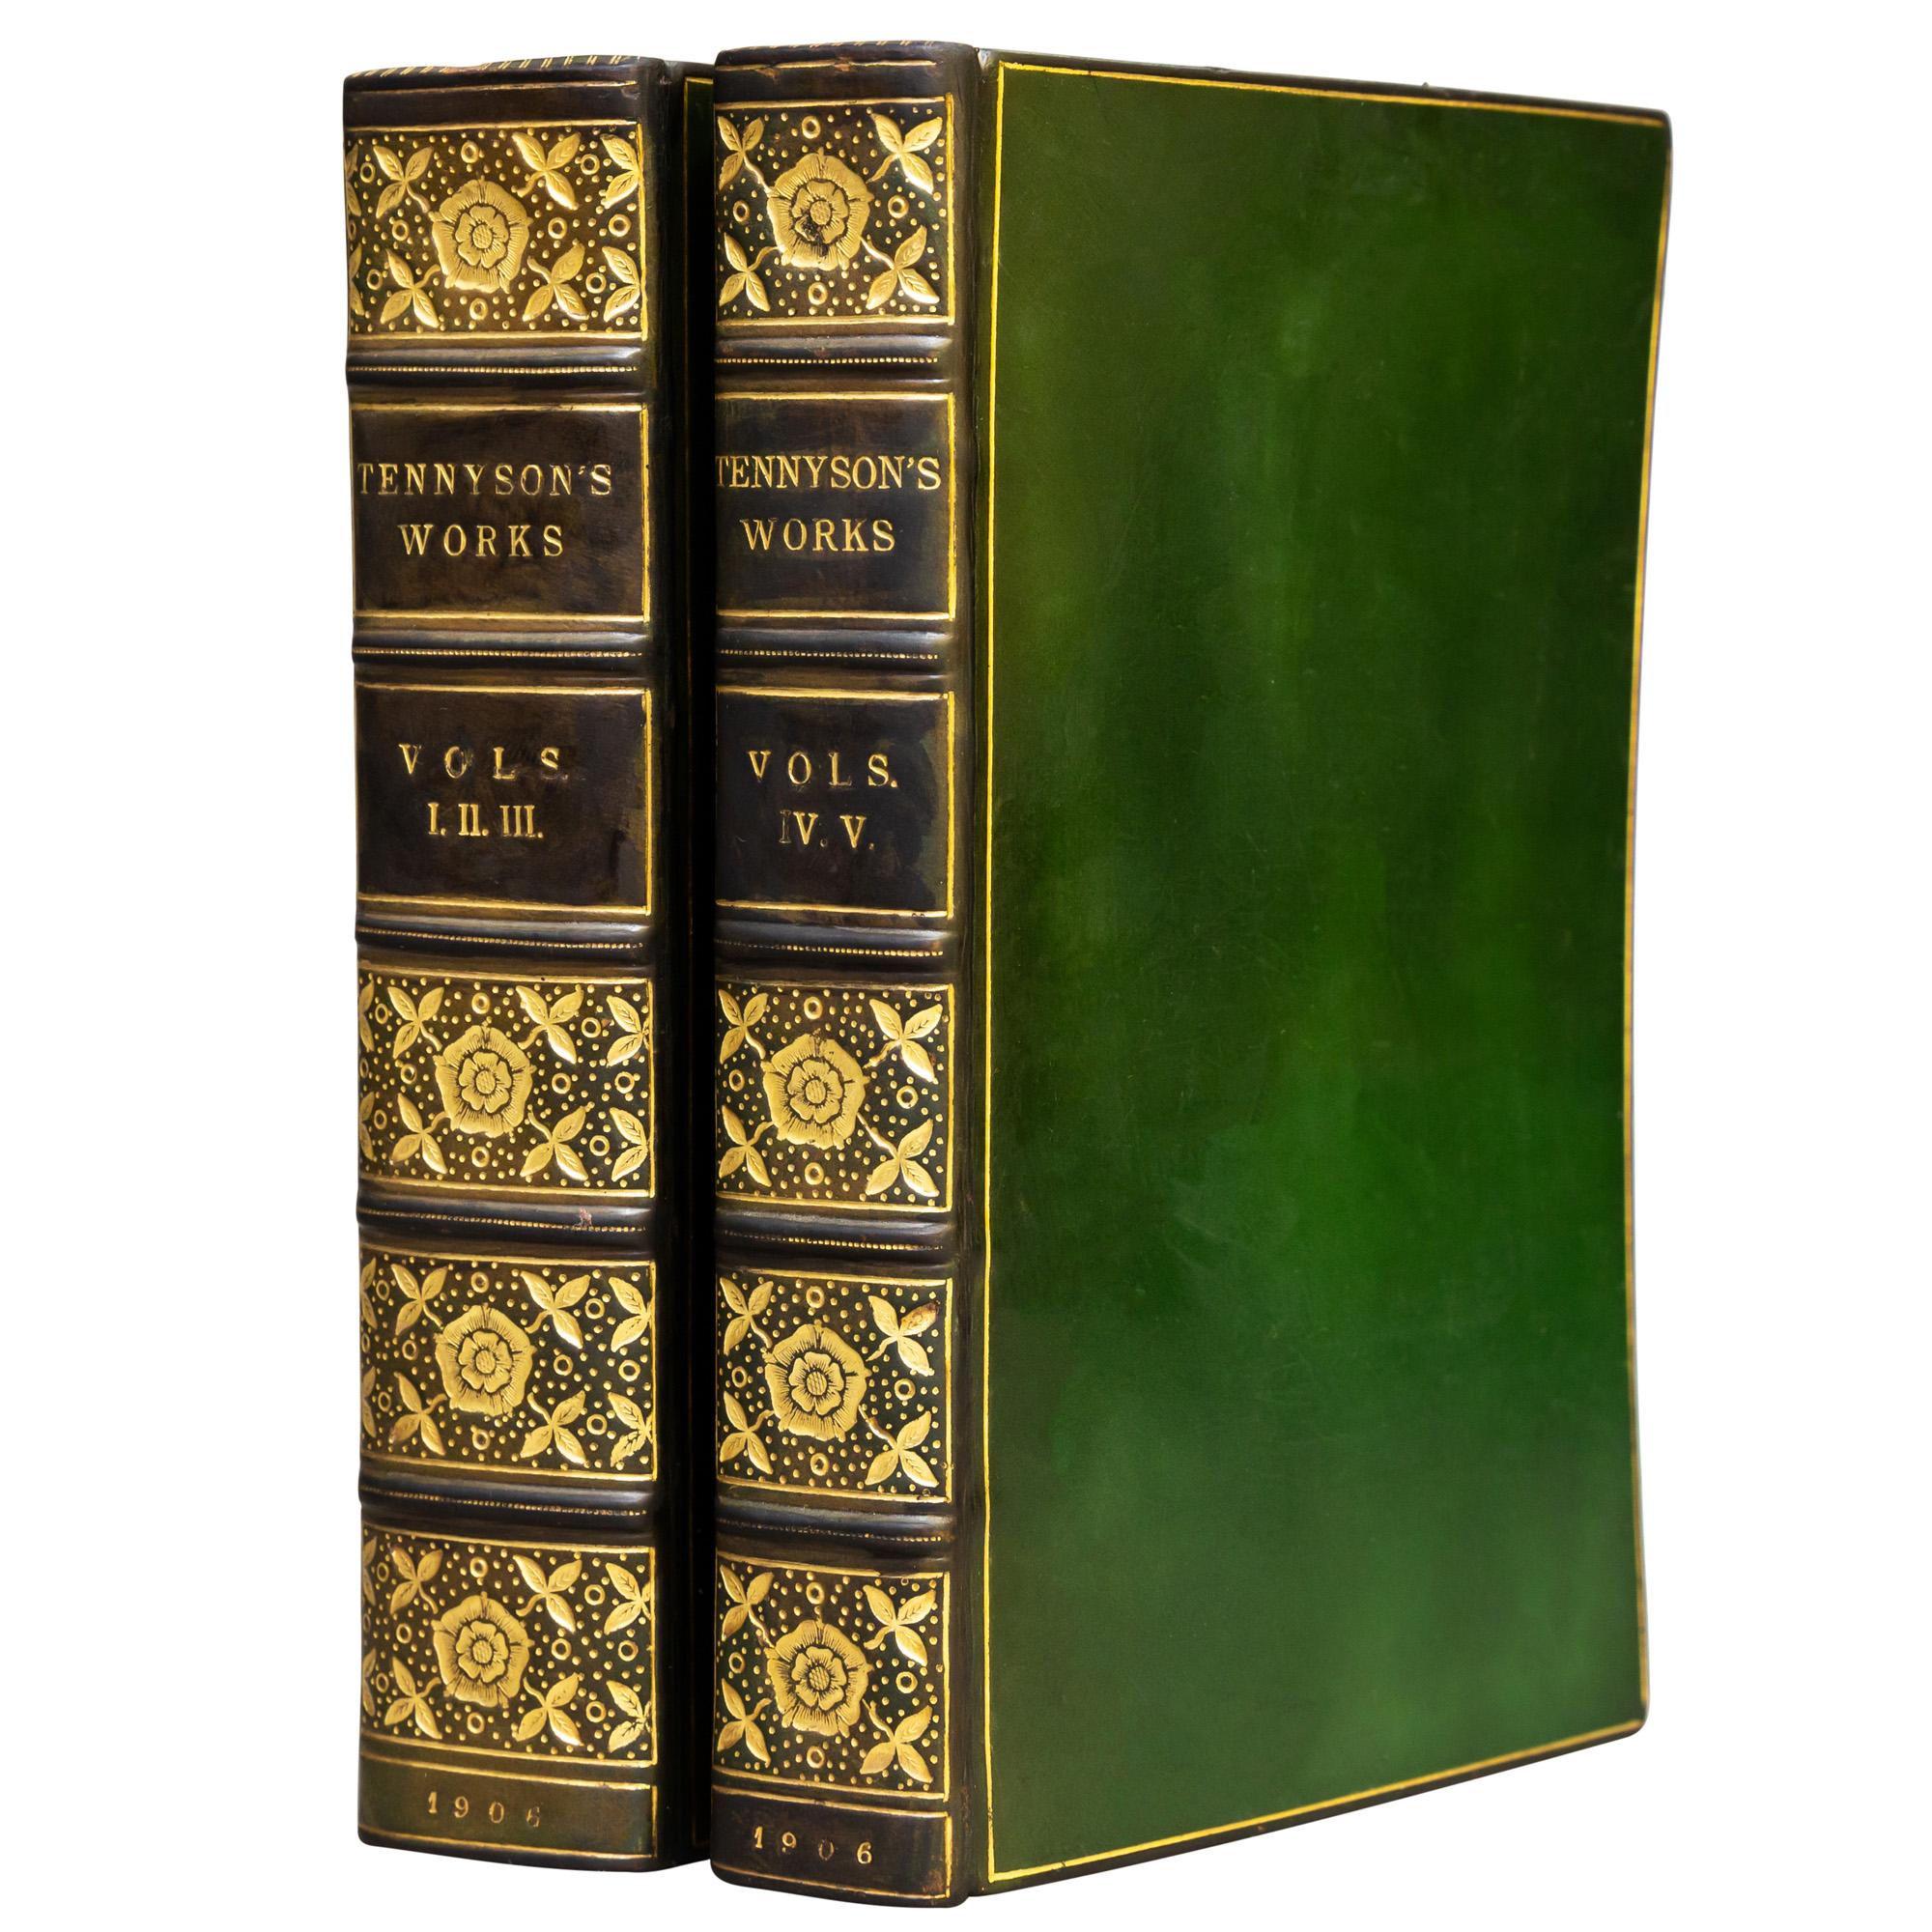 2 Volumes

5 Volumes Bound Into 2. Full Green Polished Calf By Bumpus, all edges gilt, raised bands, ornate gilt on spines.

Published: London: MacMillan & Co. 1906.